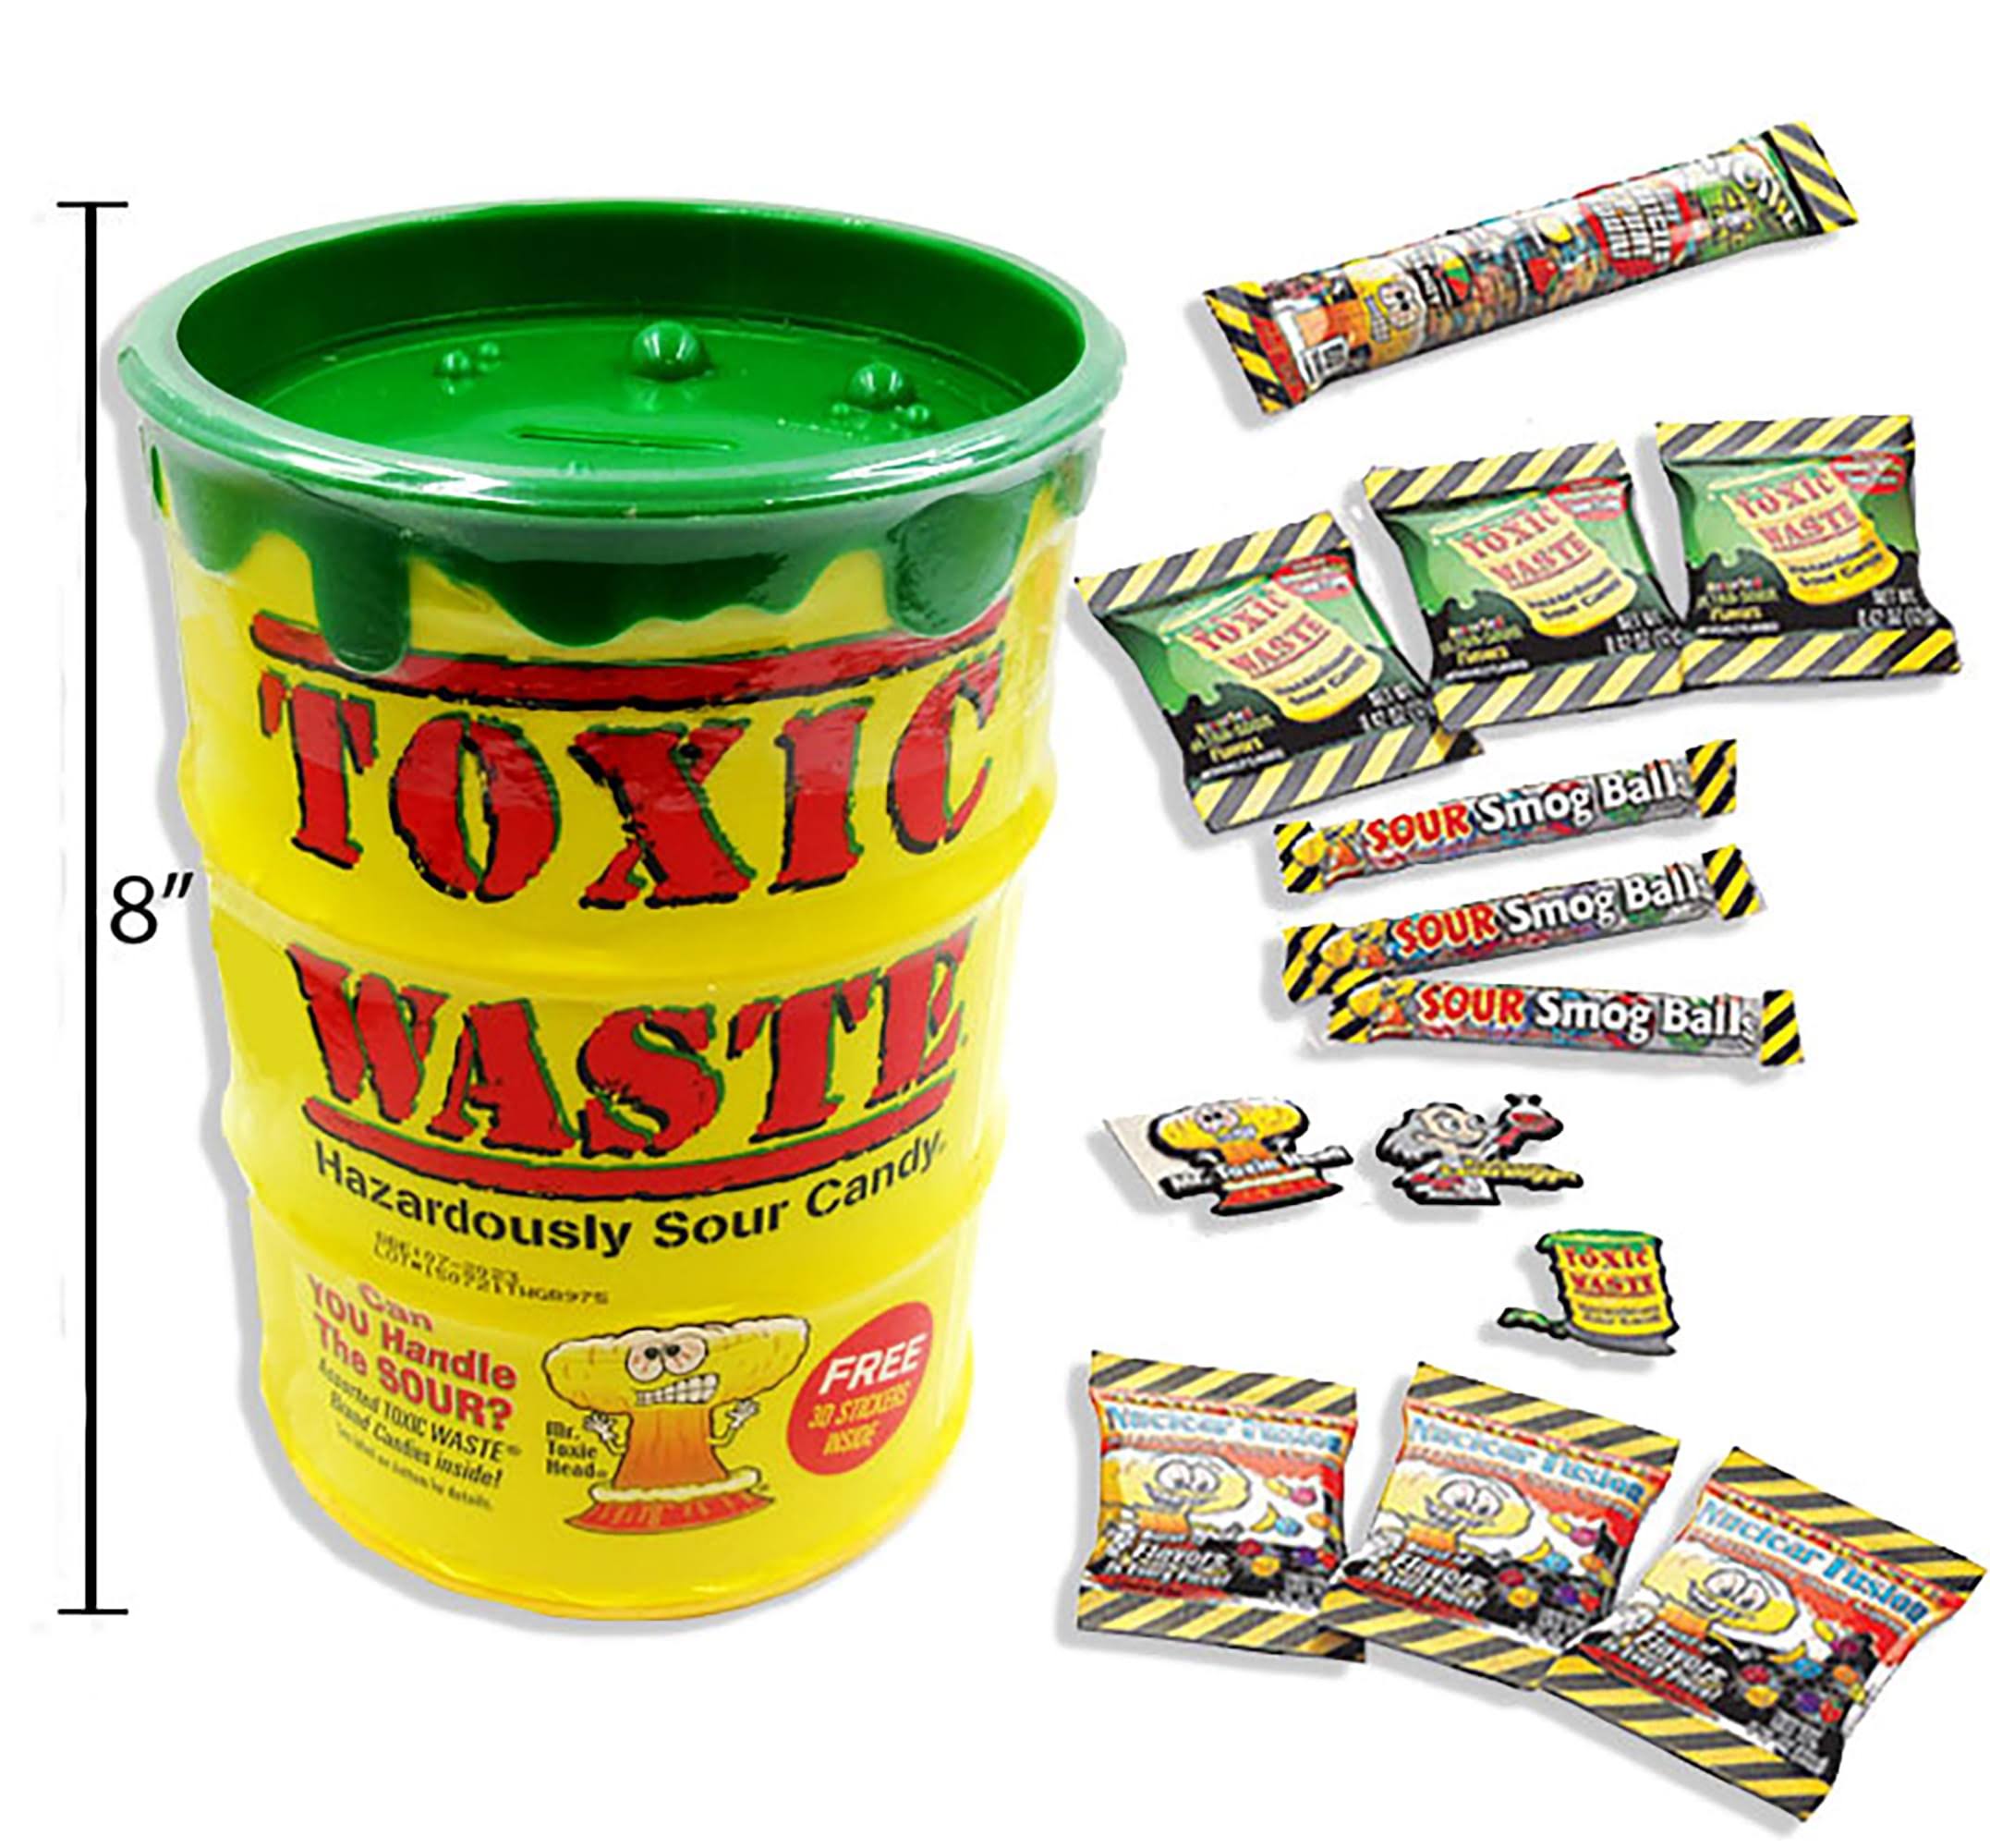 Toxic Waste Sour Candy & Coin Bank 3.95oz